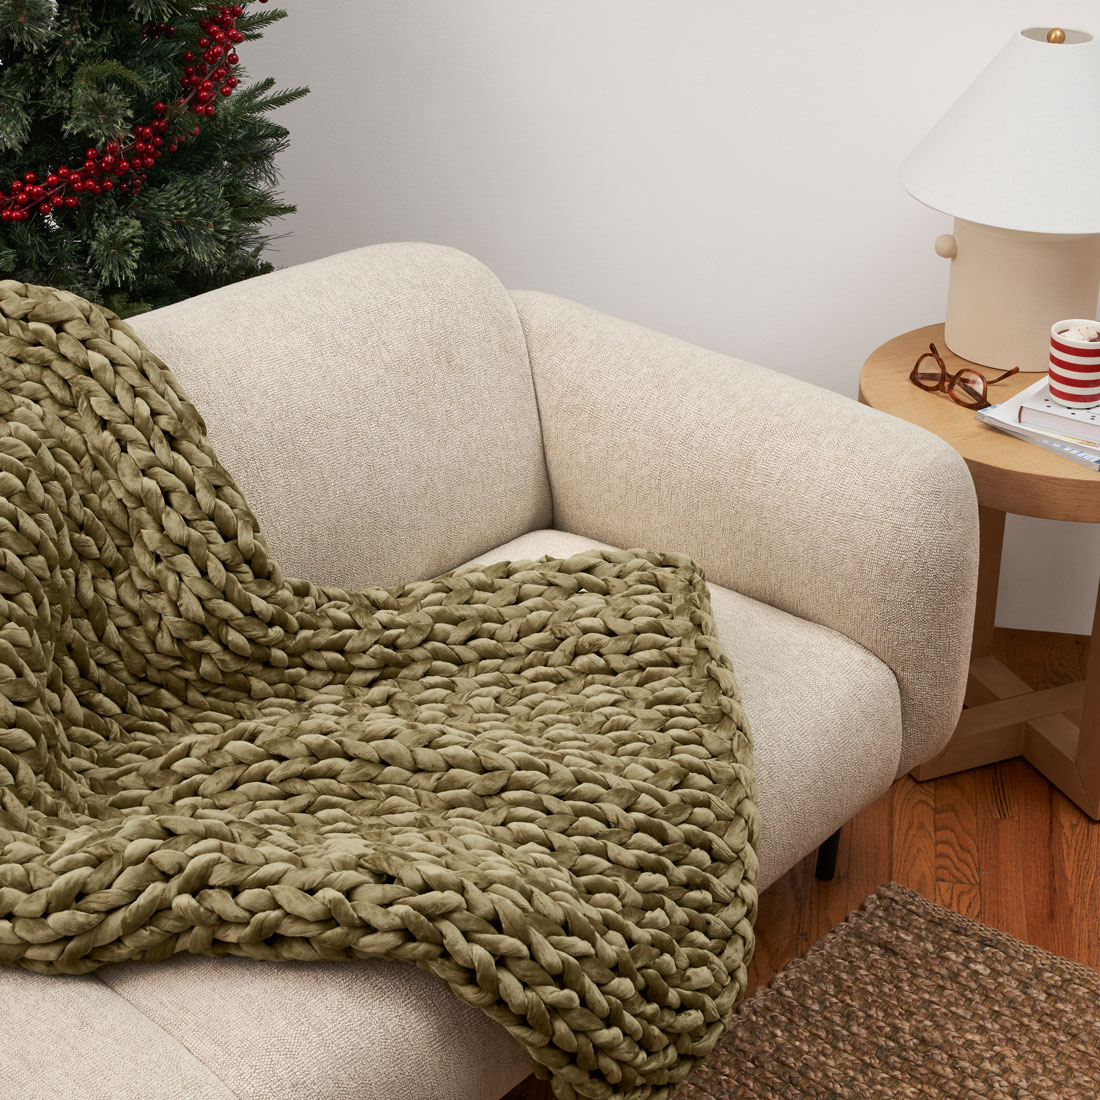 A circular image taken at a horizontal angle of a couch with light beige/off-white cushions and a large olive green, woven weighted blanket draped over the front and back. At the bottom of the image, part of a medium brown woven rug is visible. Next to the couch, on the right side of the image is a small, light brown, circular wooden side table. A pair of red glasses, a stack of books, a red and white striped mug of brown liquid topped with white cream and a light beige lamp with a white lampshade resting on the table. Behind the couch, the dark green branches of a pine tree decorated with bright red holly berries is visible. 